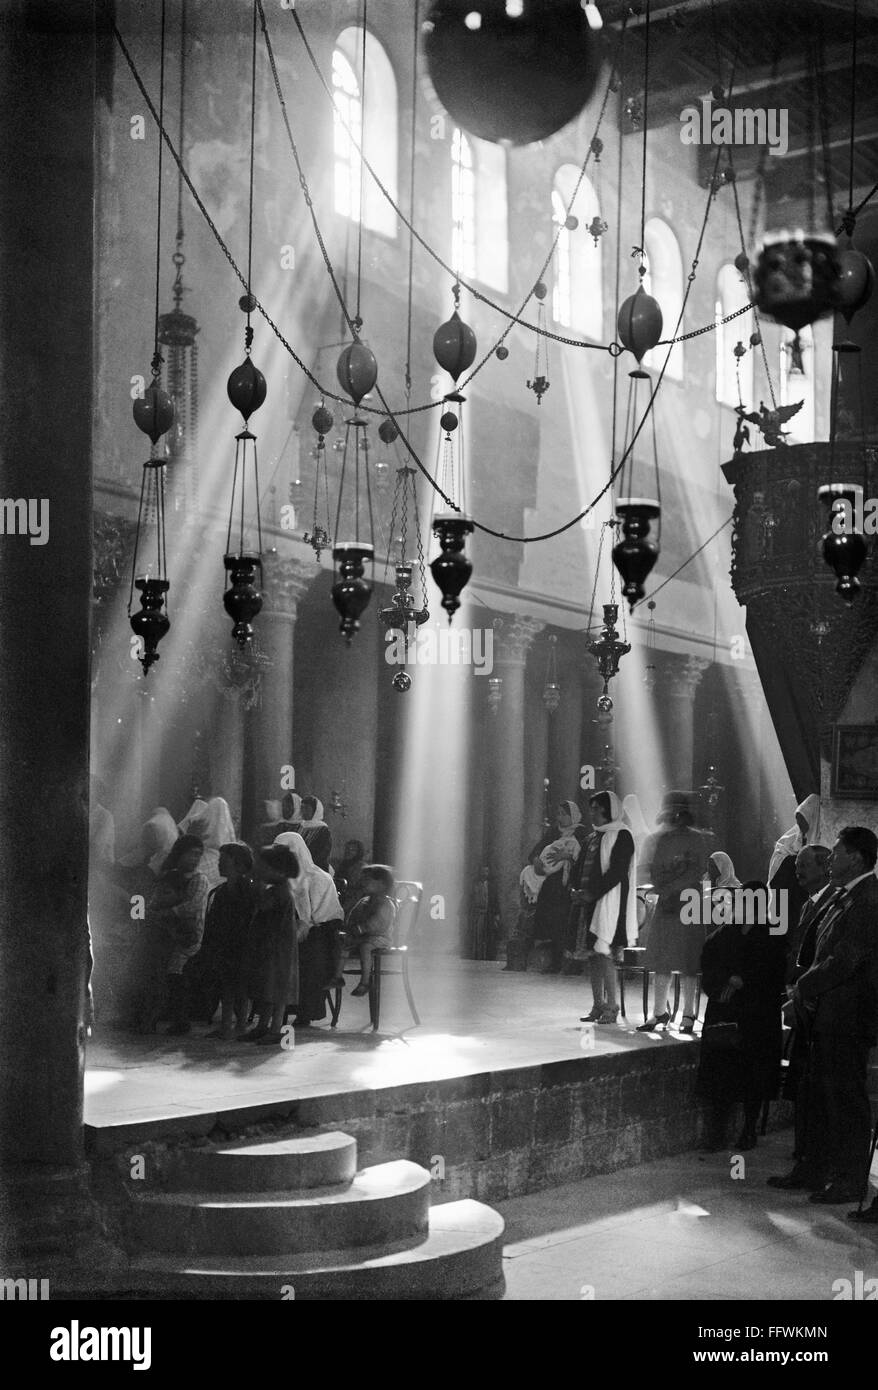 CHURCH OF THE NATIVITY. /nChristmas services at the Church of the Nativity in Bethlehem. Photograph, c1936. Stock Photo